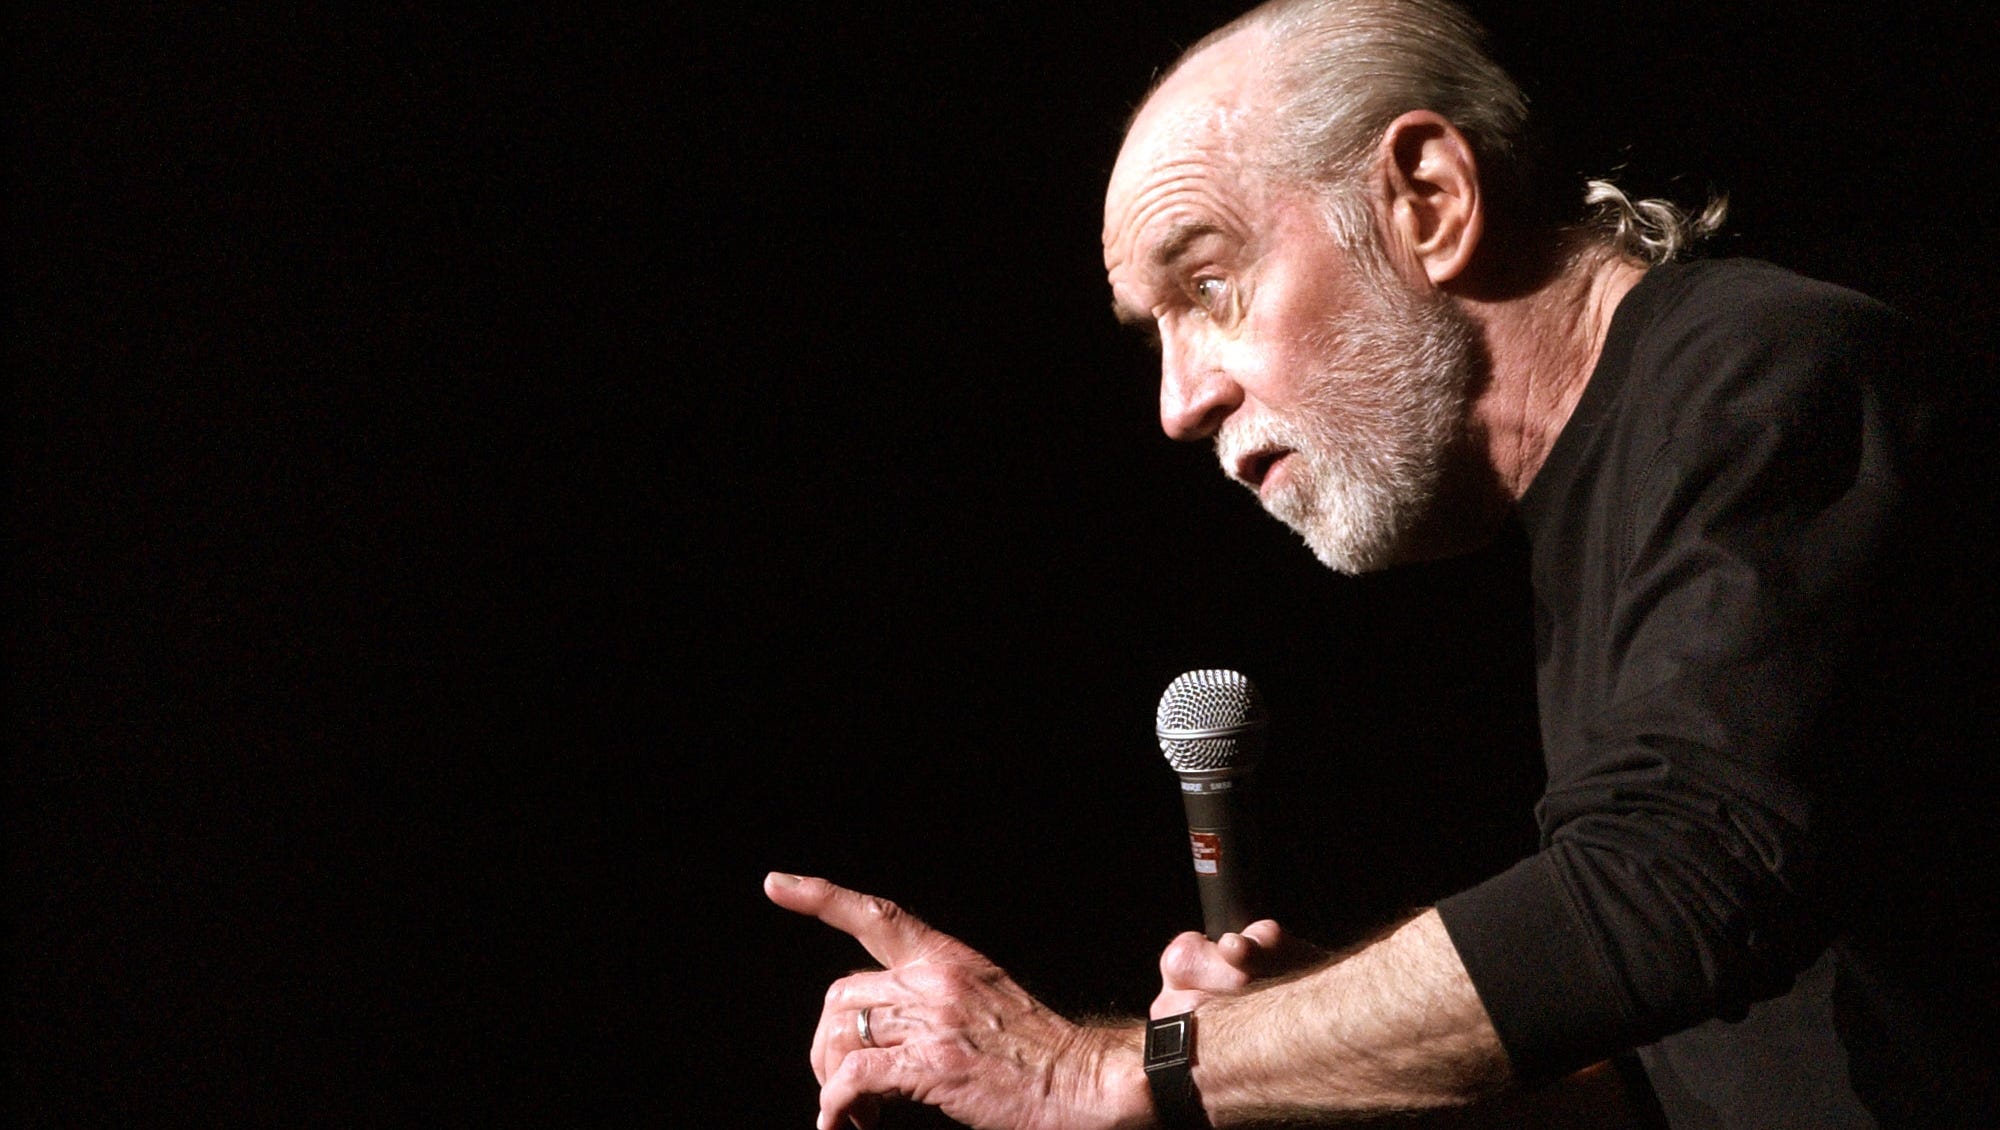 Best-bets for May 20: the wit of Carlin and Shakespeare